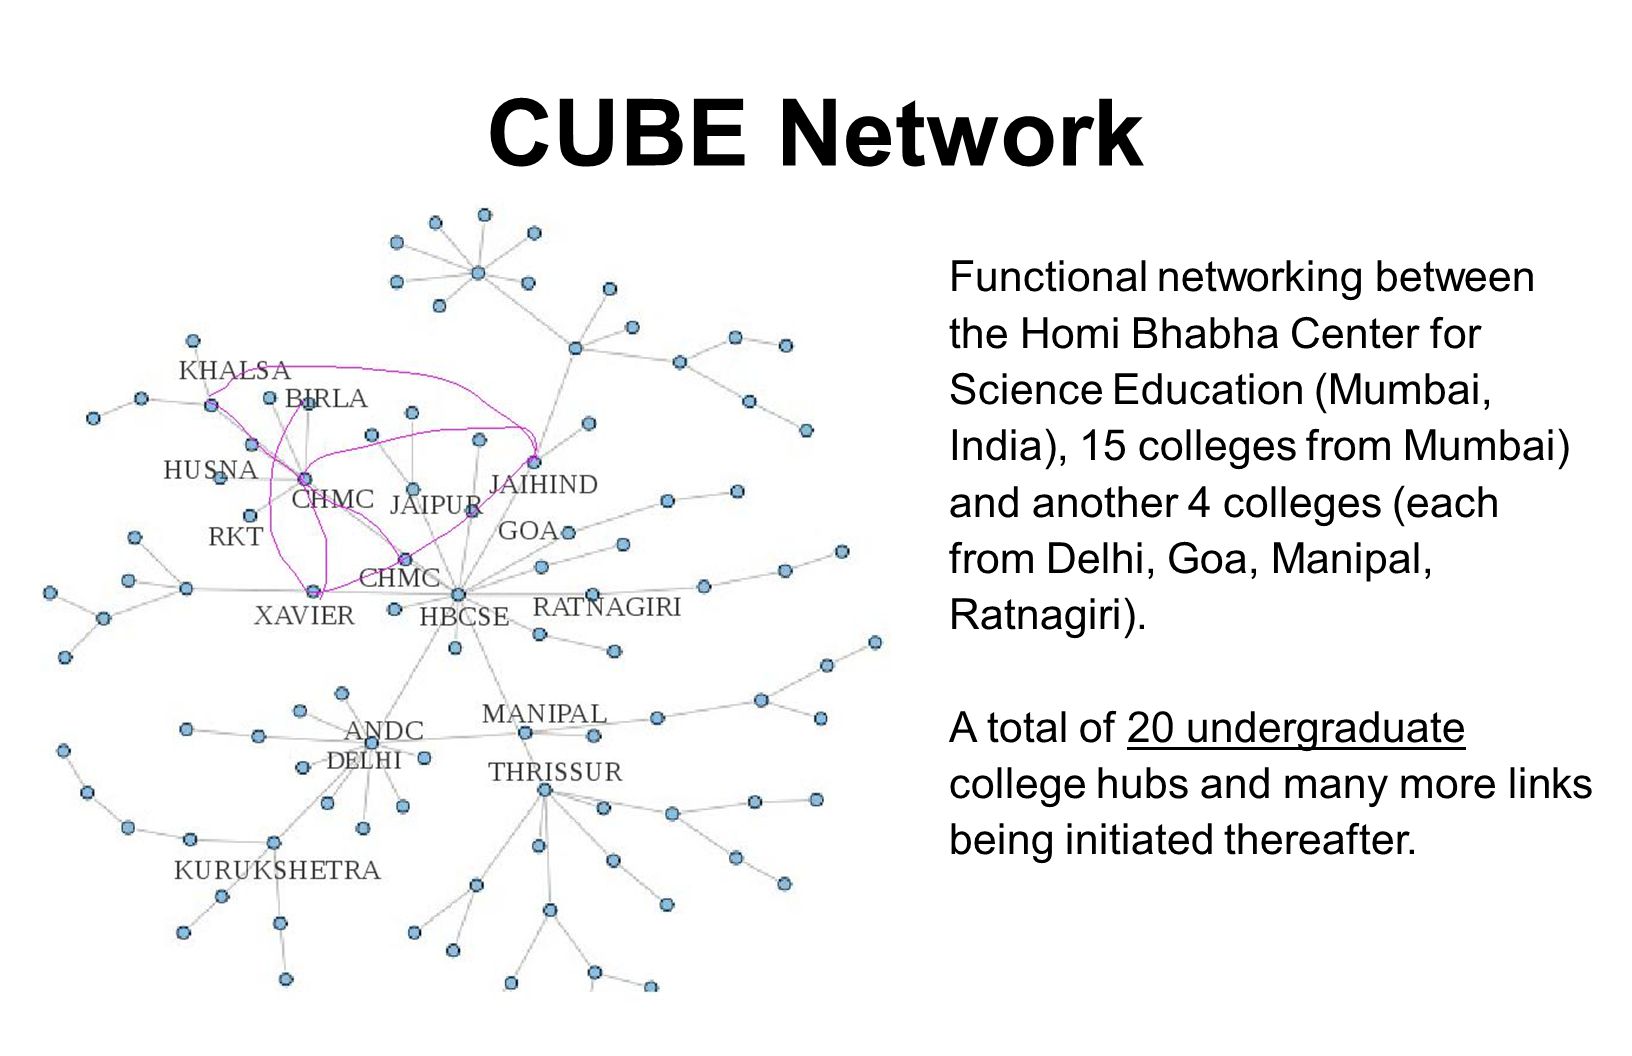 CUBE Network Functional networking between the Homi Bhabha Center for Science Education (Mumbai, India), 15 colleges from Mumbai) and another 4 colleges (each from Delhi, Goa, Manipal, Ratnagiri).